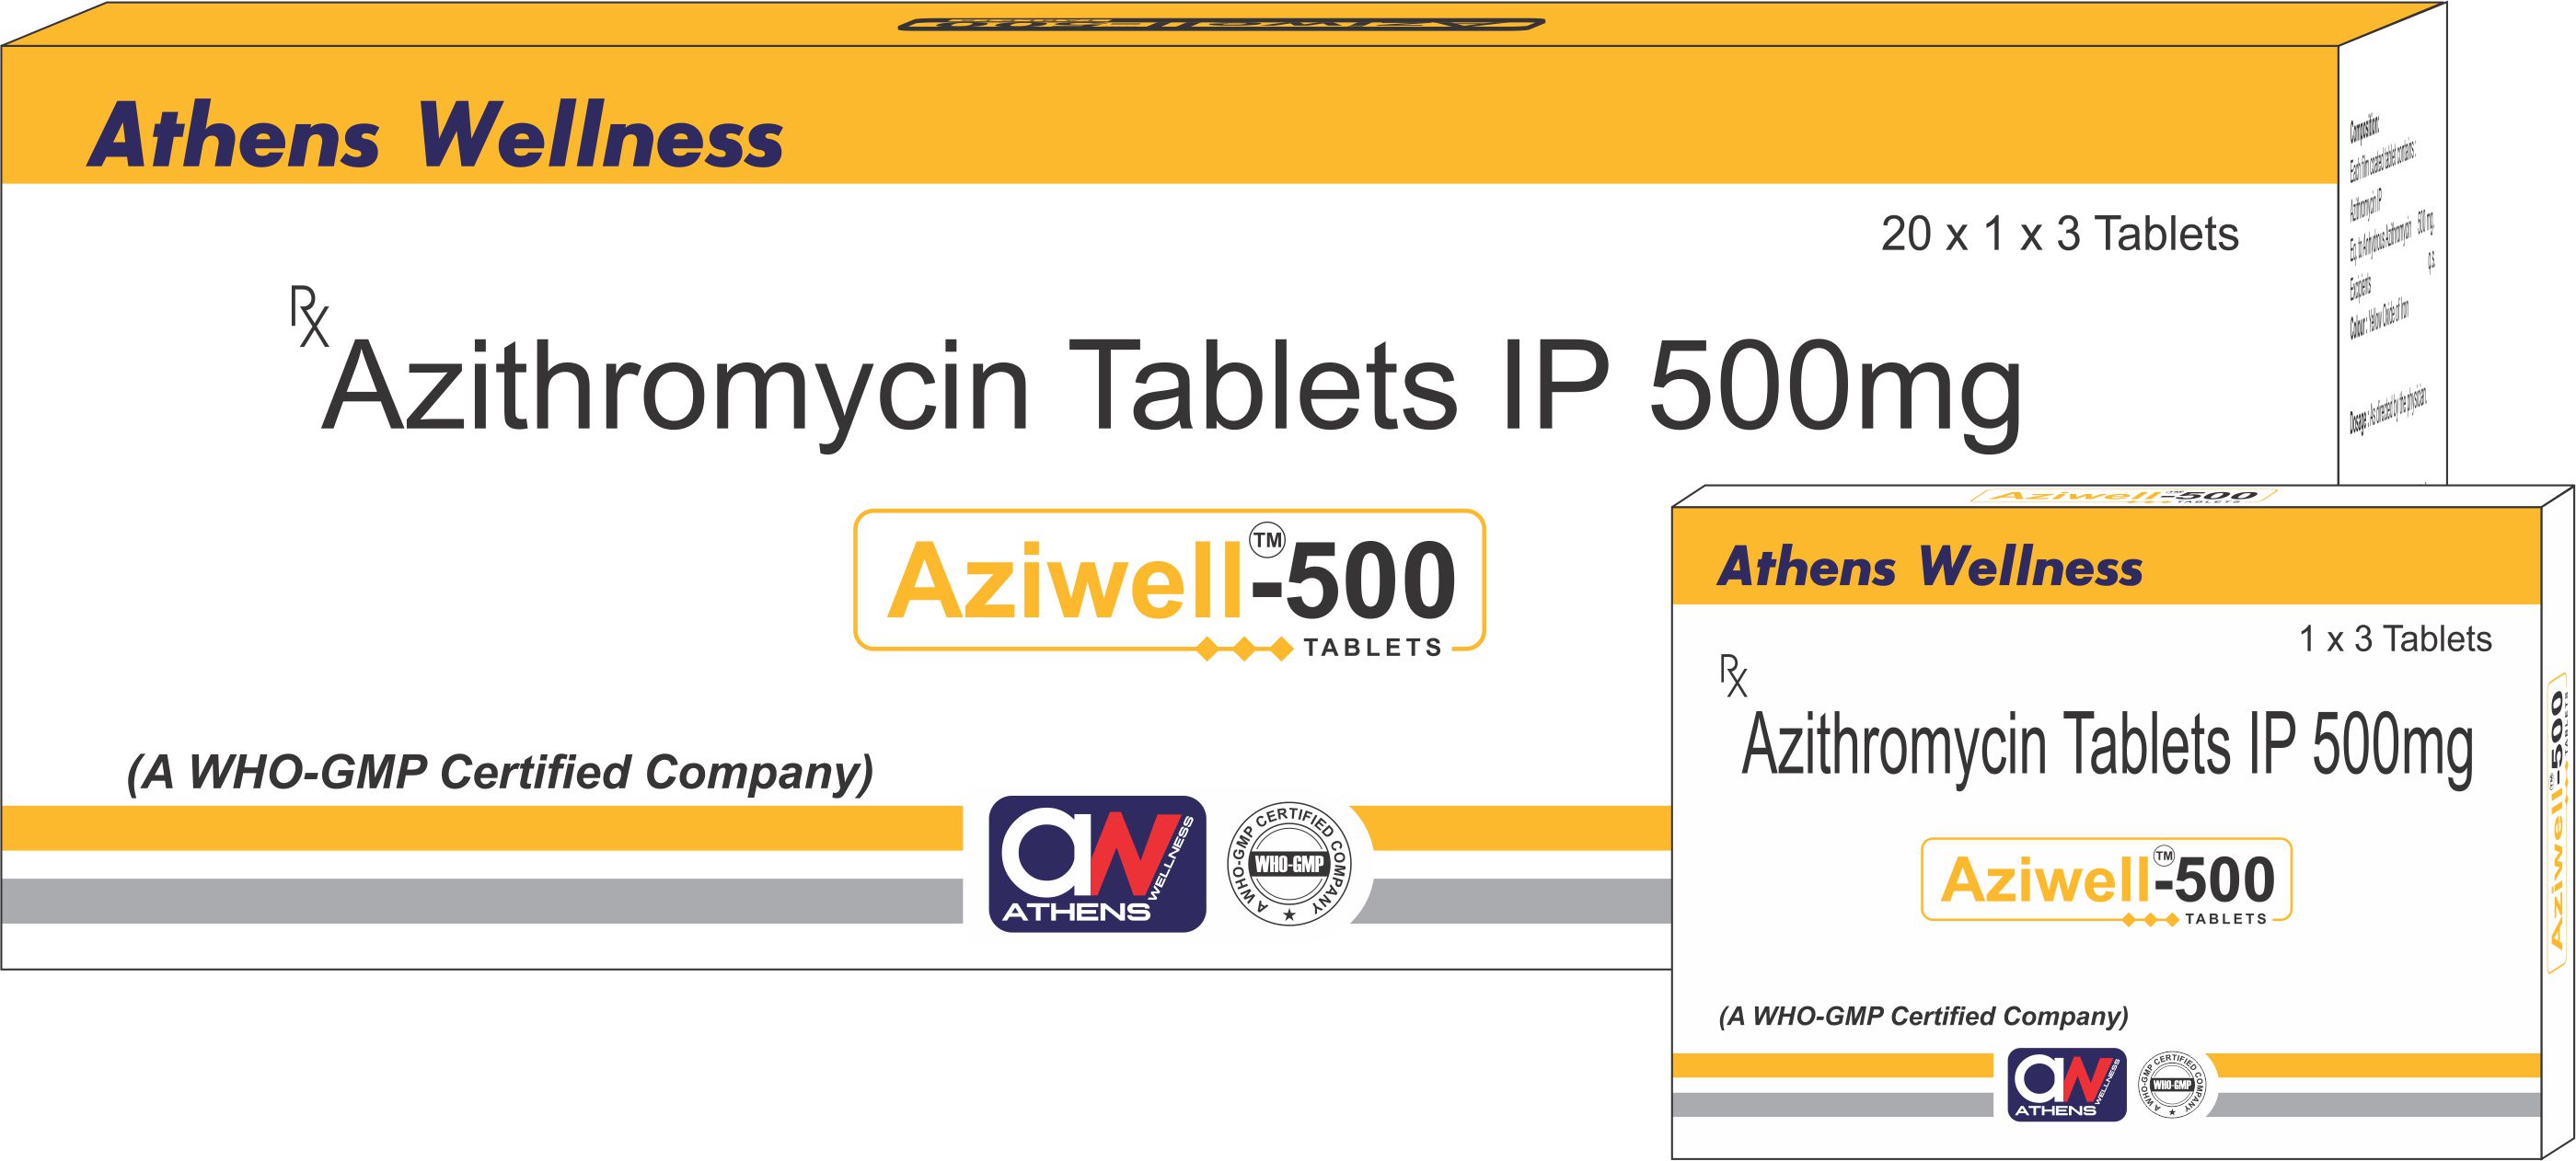 AZIWELL-500 TABLETS